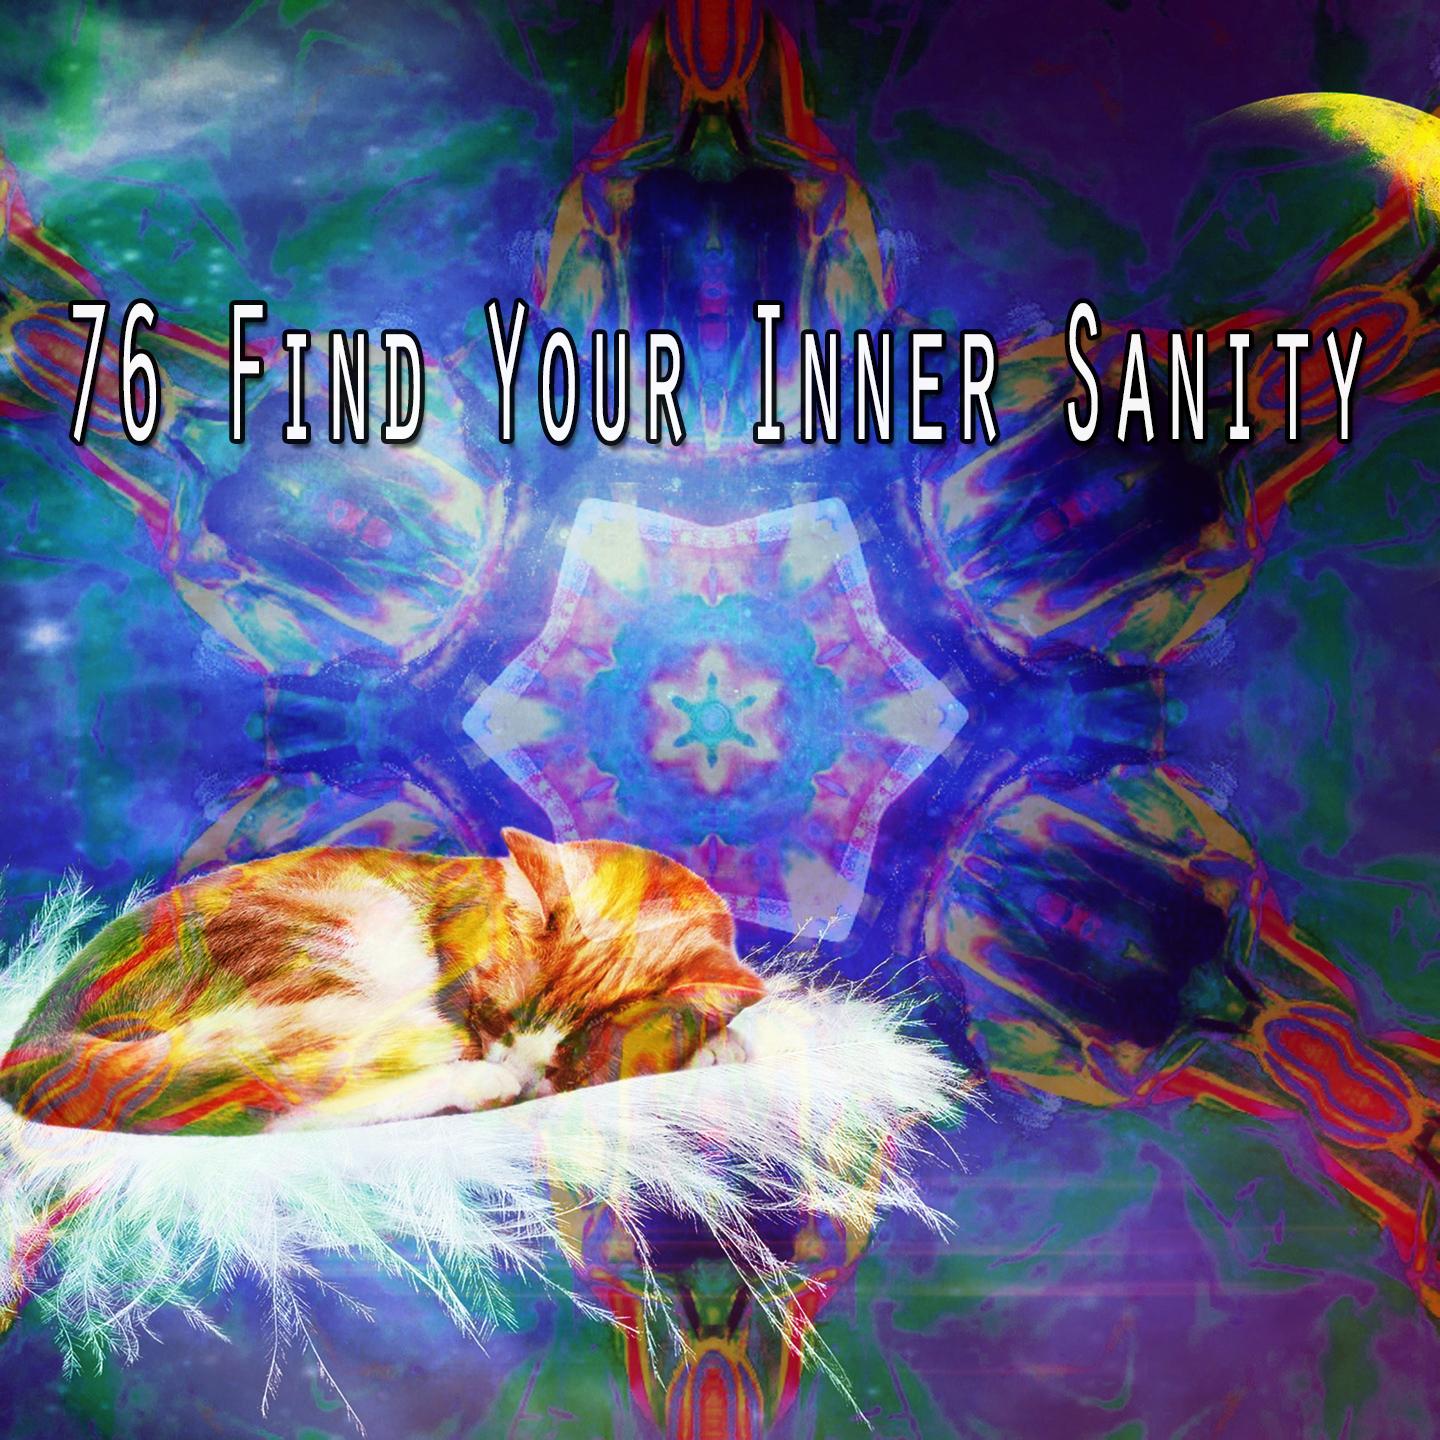 76 Find Your Inner Sanity